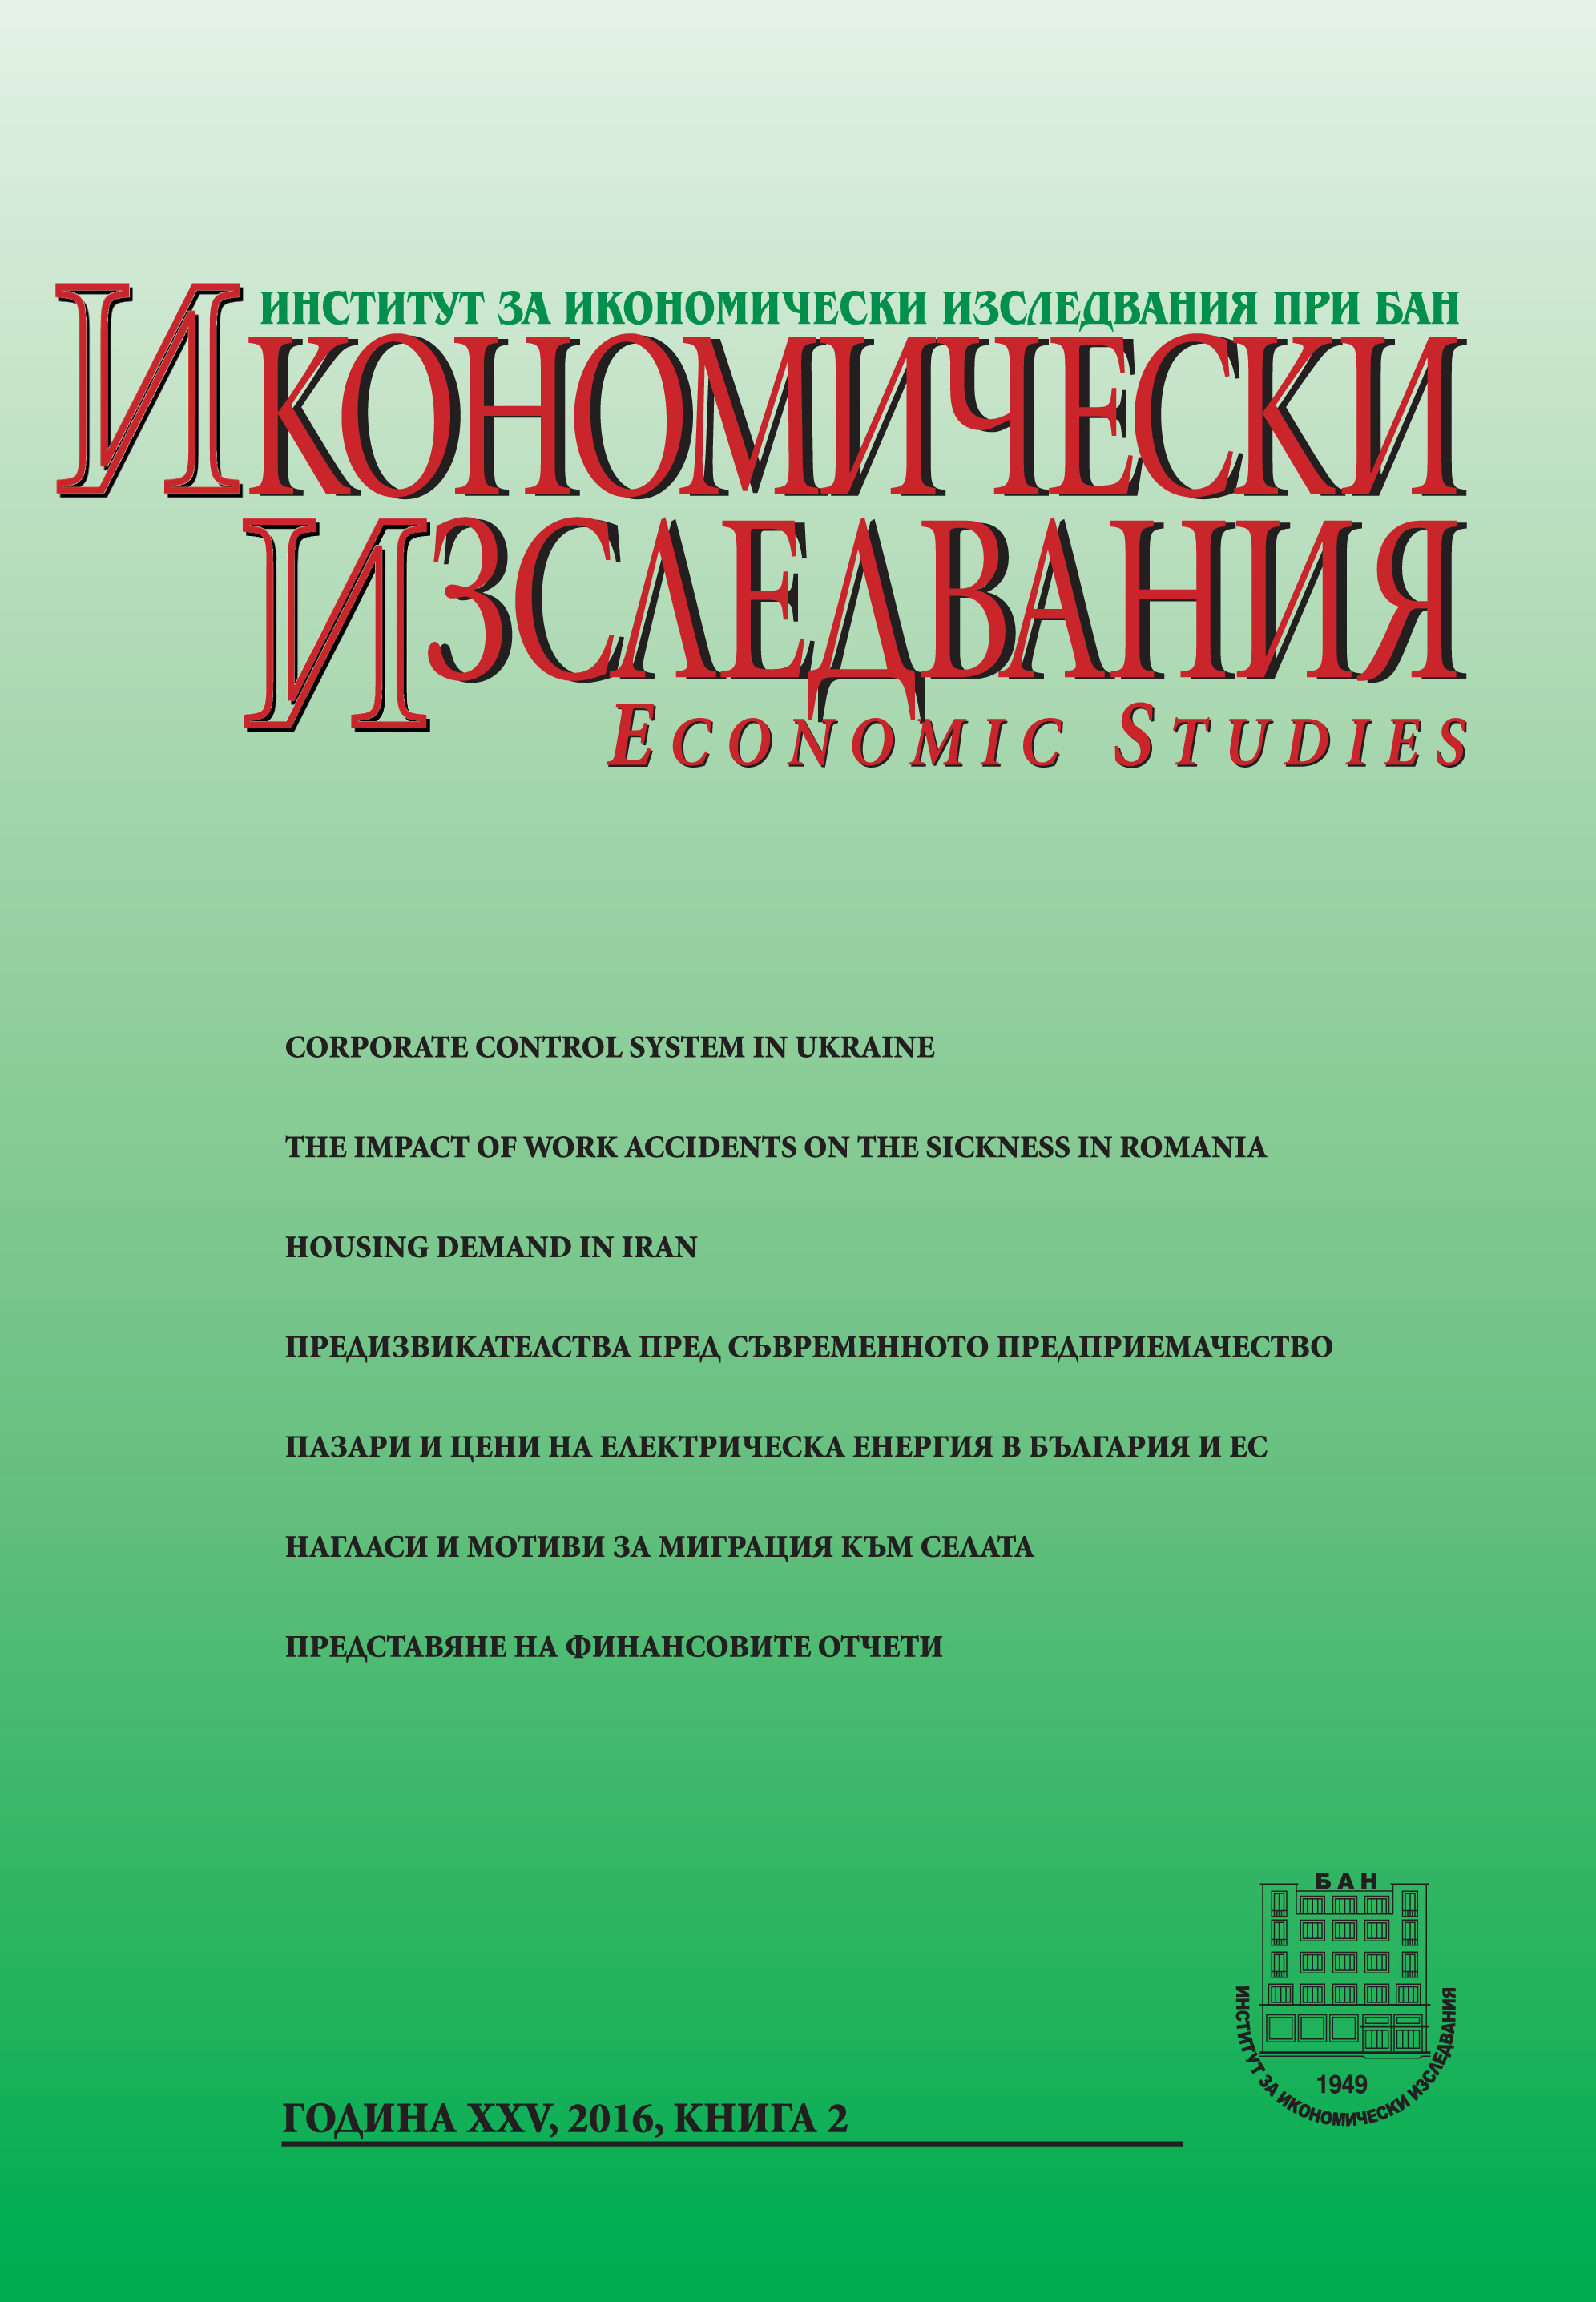 Theoretical and Methodological Aspects of Formation of Corporate Control System in Ukraine